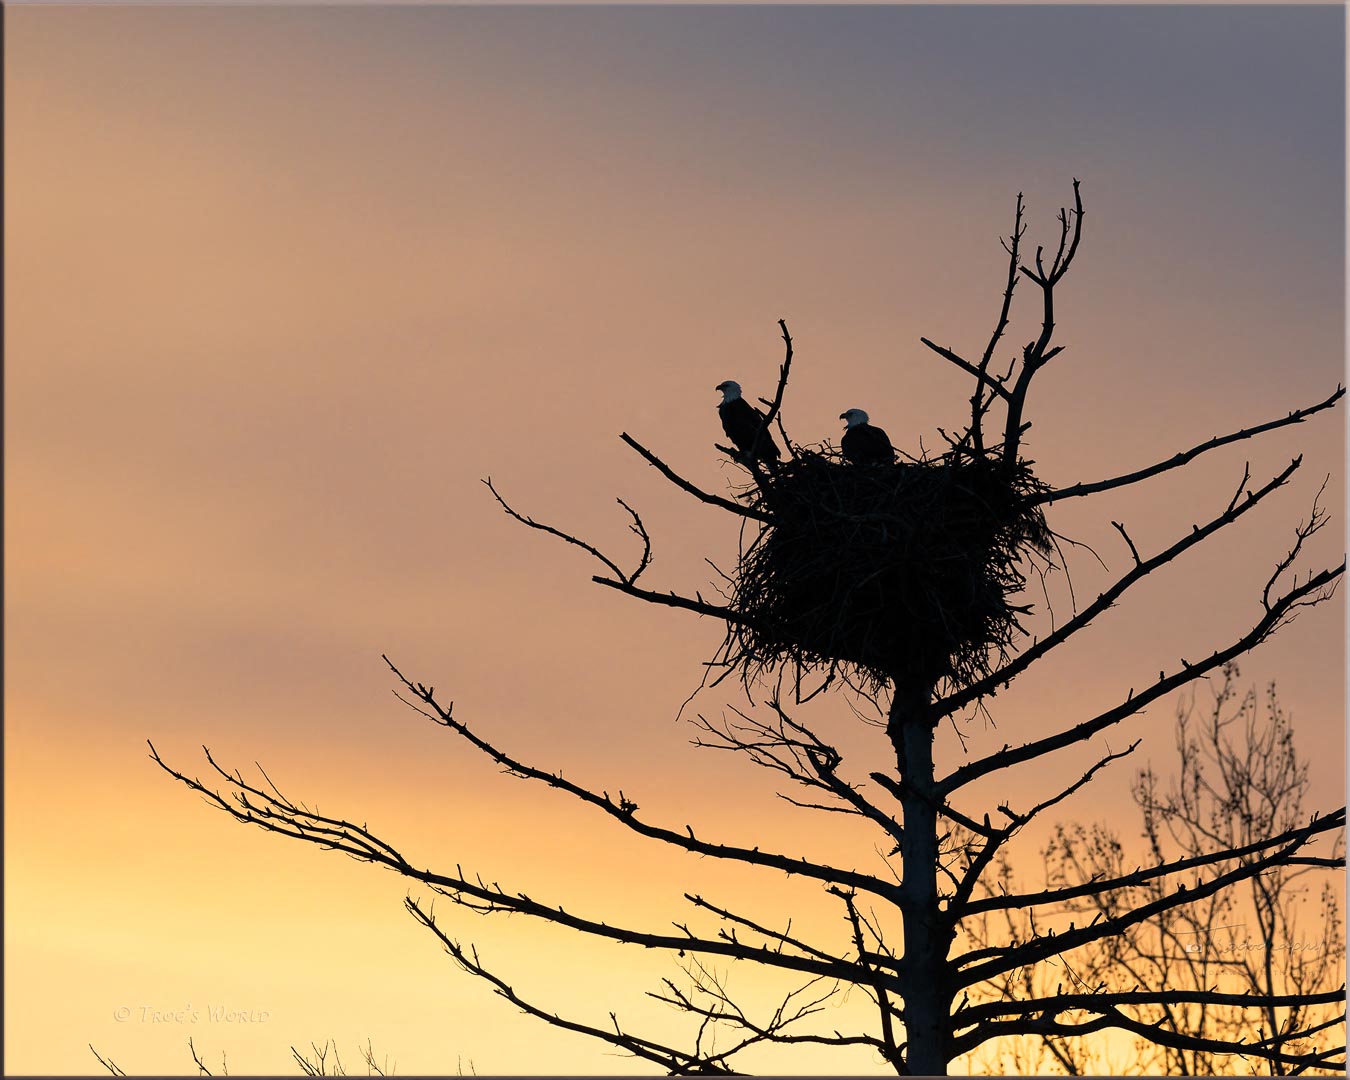 Mated Bald Eagles in their nest